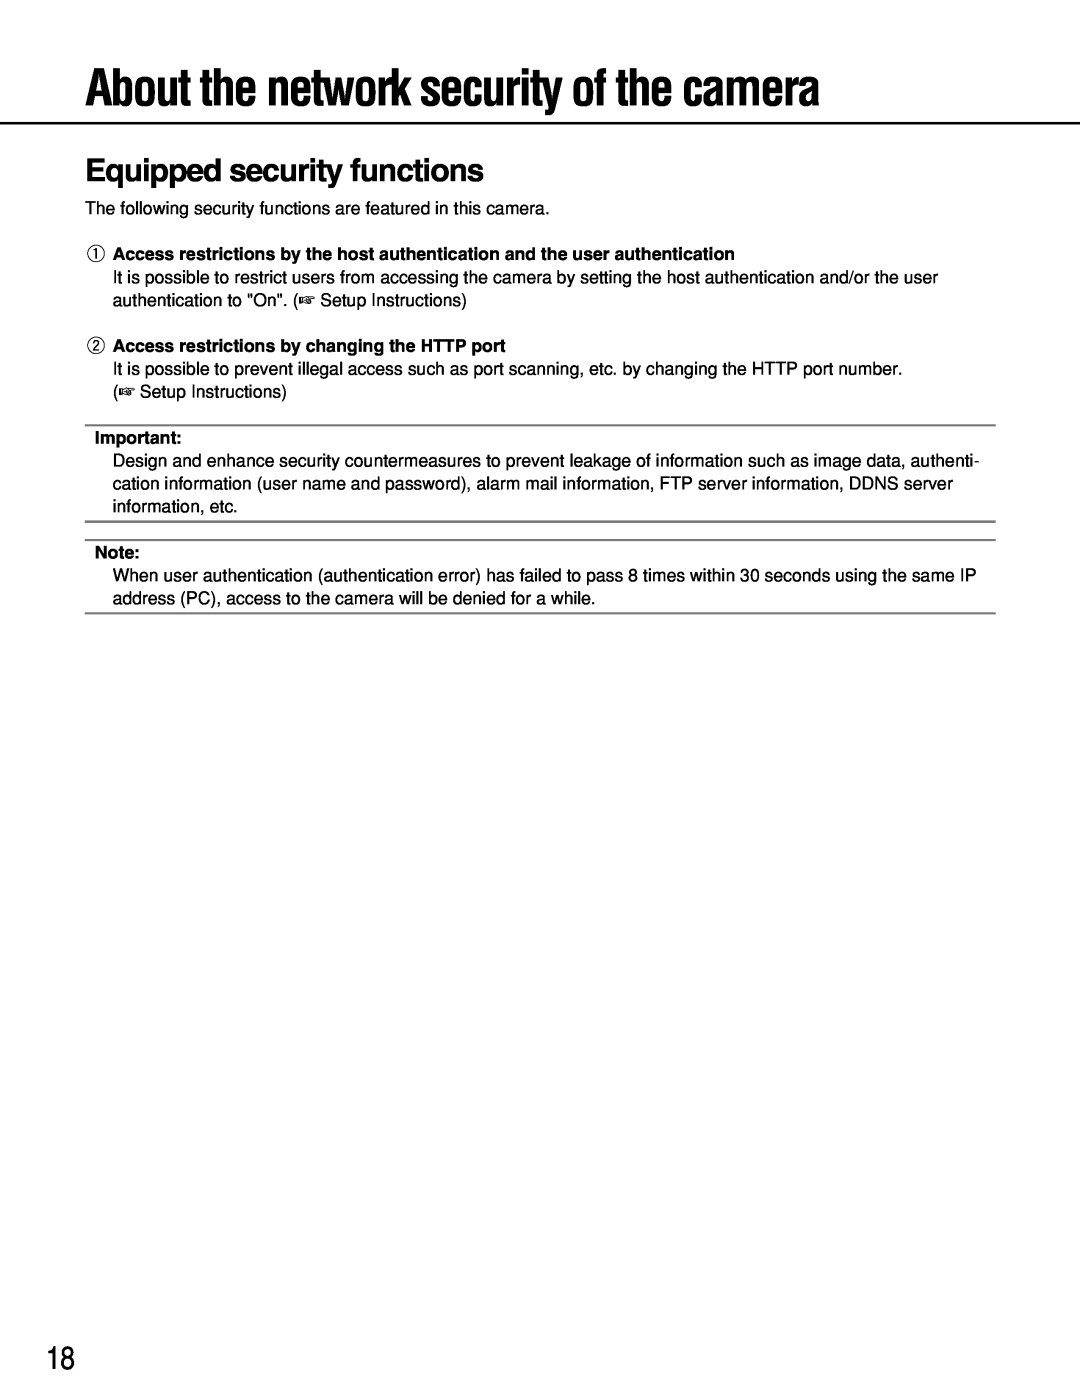 Panasonic WV-NF302 operating instructions About the network security of the camera, Equipped security functions 